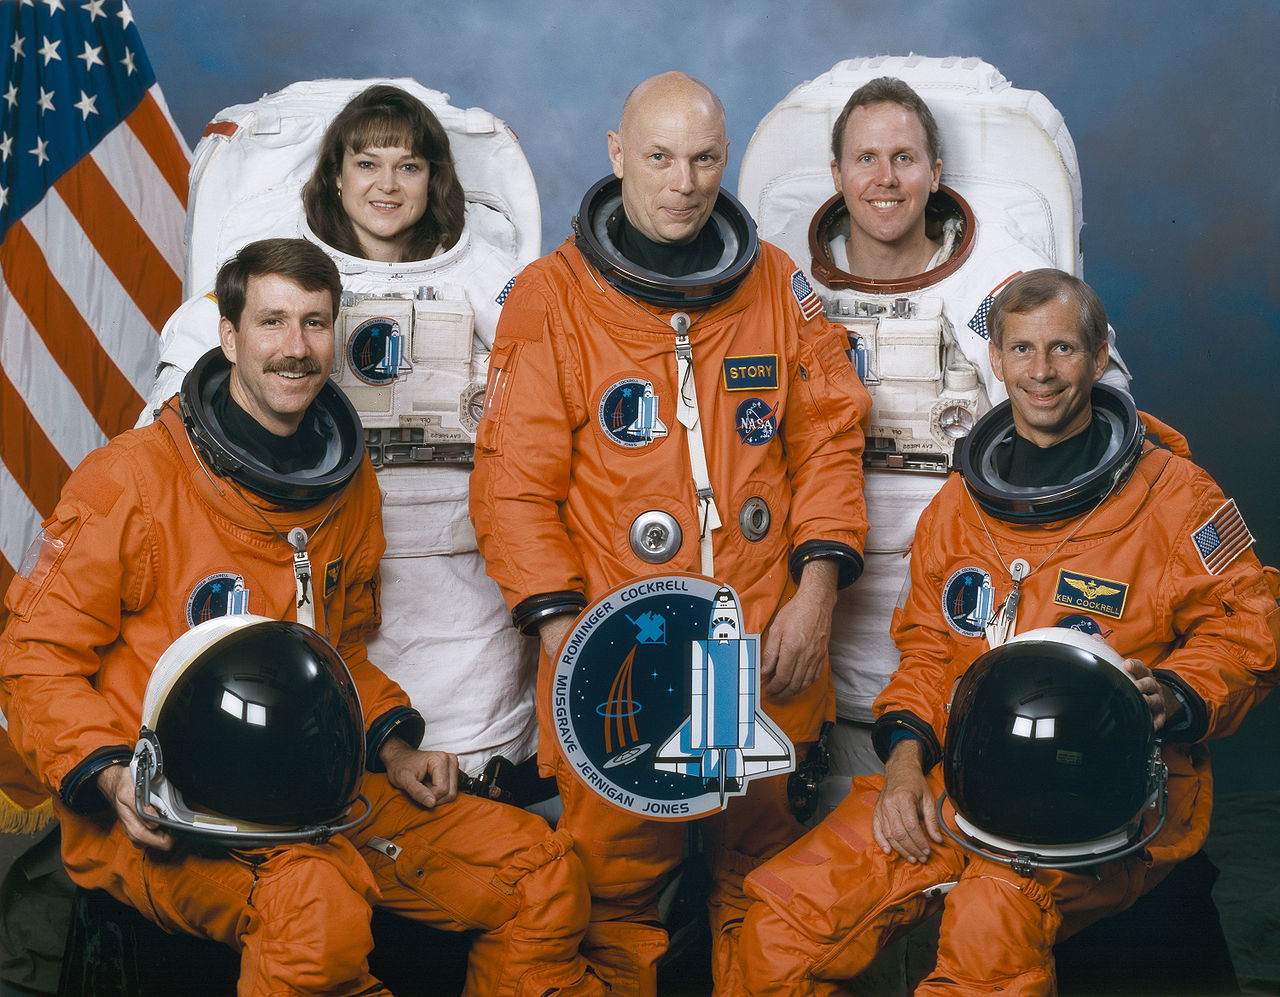 The flight crew of Columbia STS-80, seated, left to right: Captain Kent V. Rominger, USN, and Captain Kenneth D. Cockrell, USN; standing, Tamara E. Jernigan, Ph.D.; Franklin Story Musgrave, M.D.; and Thomas D. Jones, Ph.D.. (NASA)